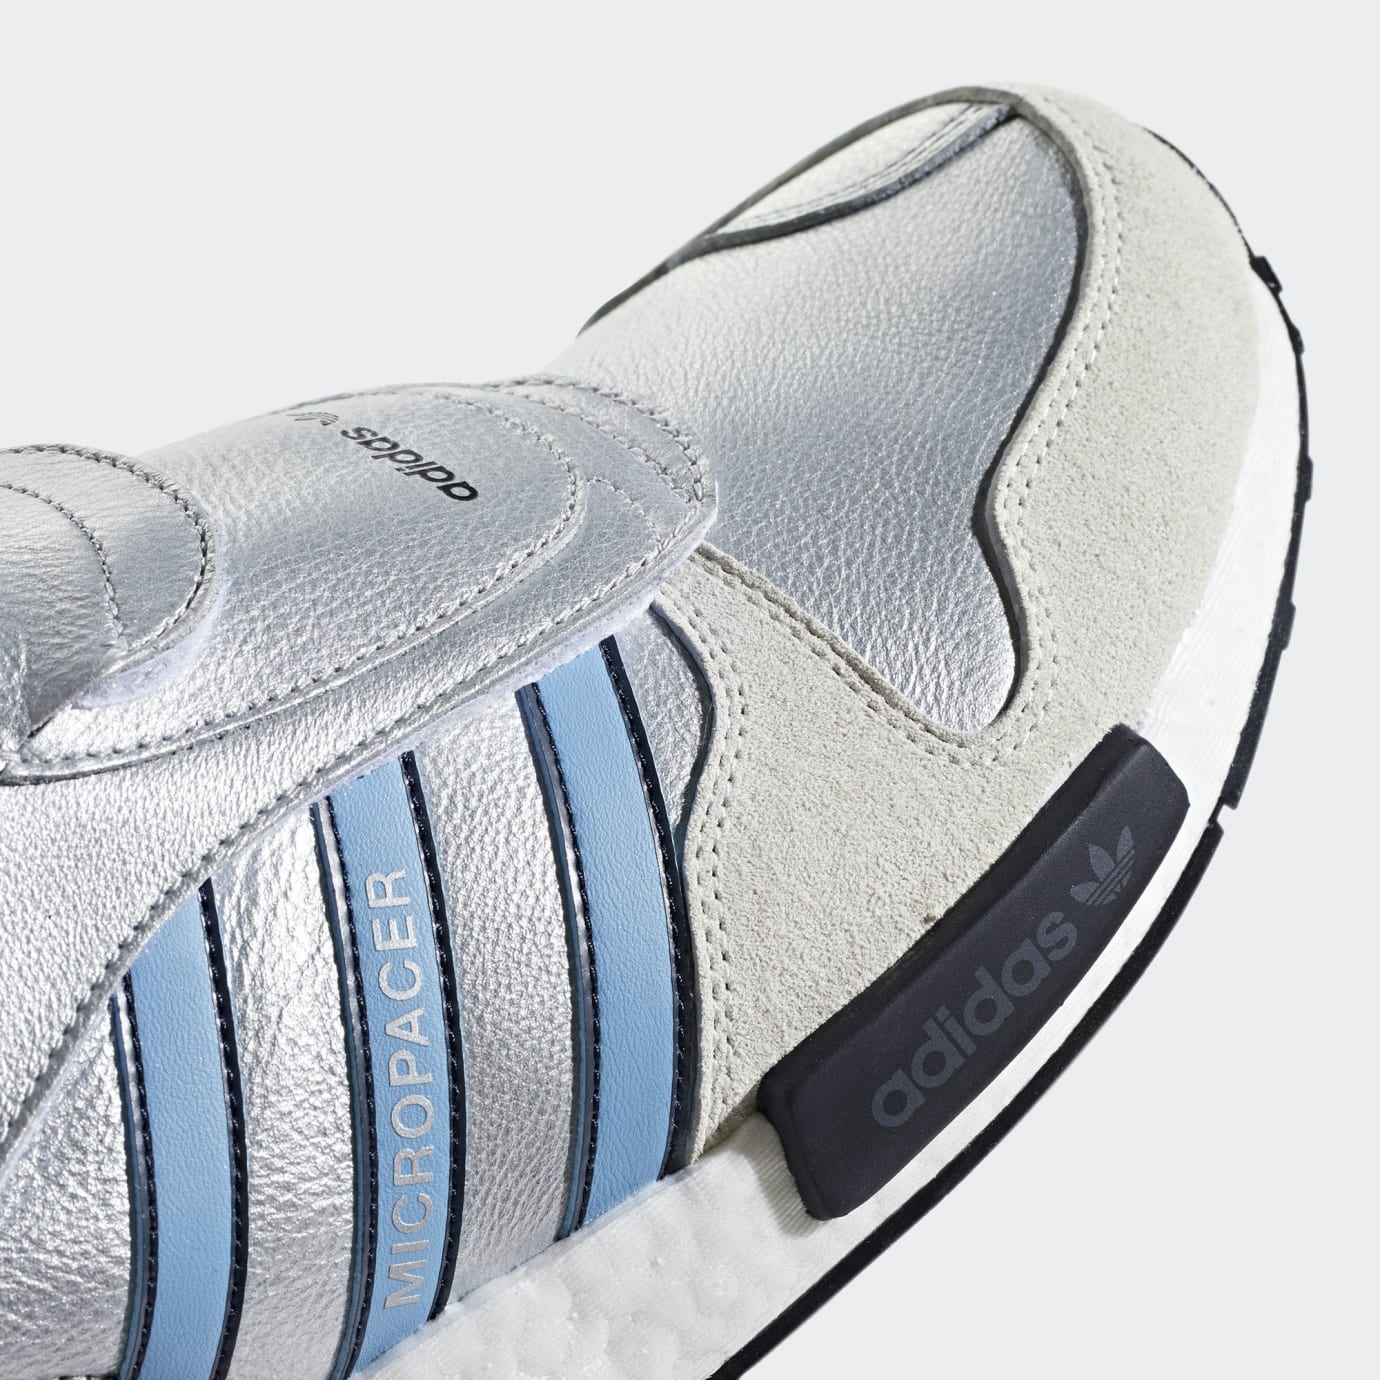 adidas micropacer 2018